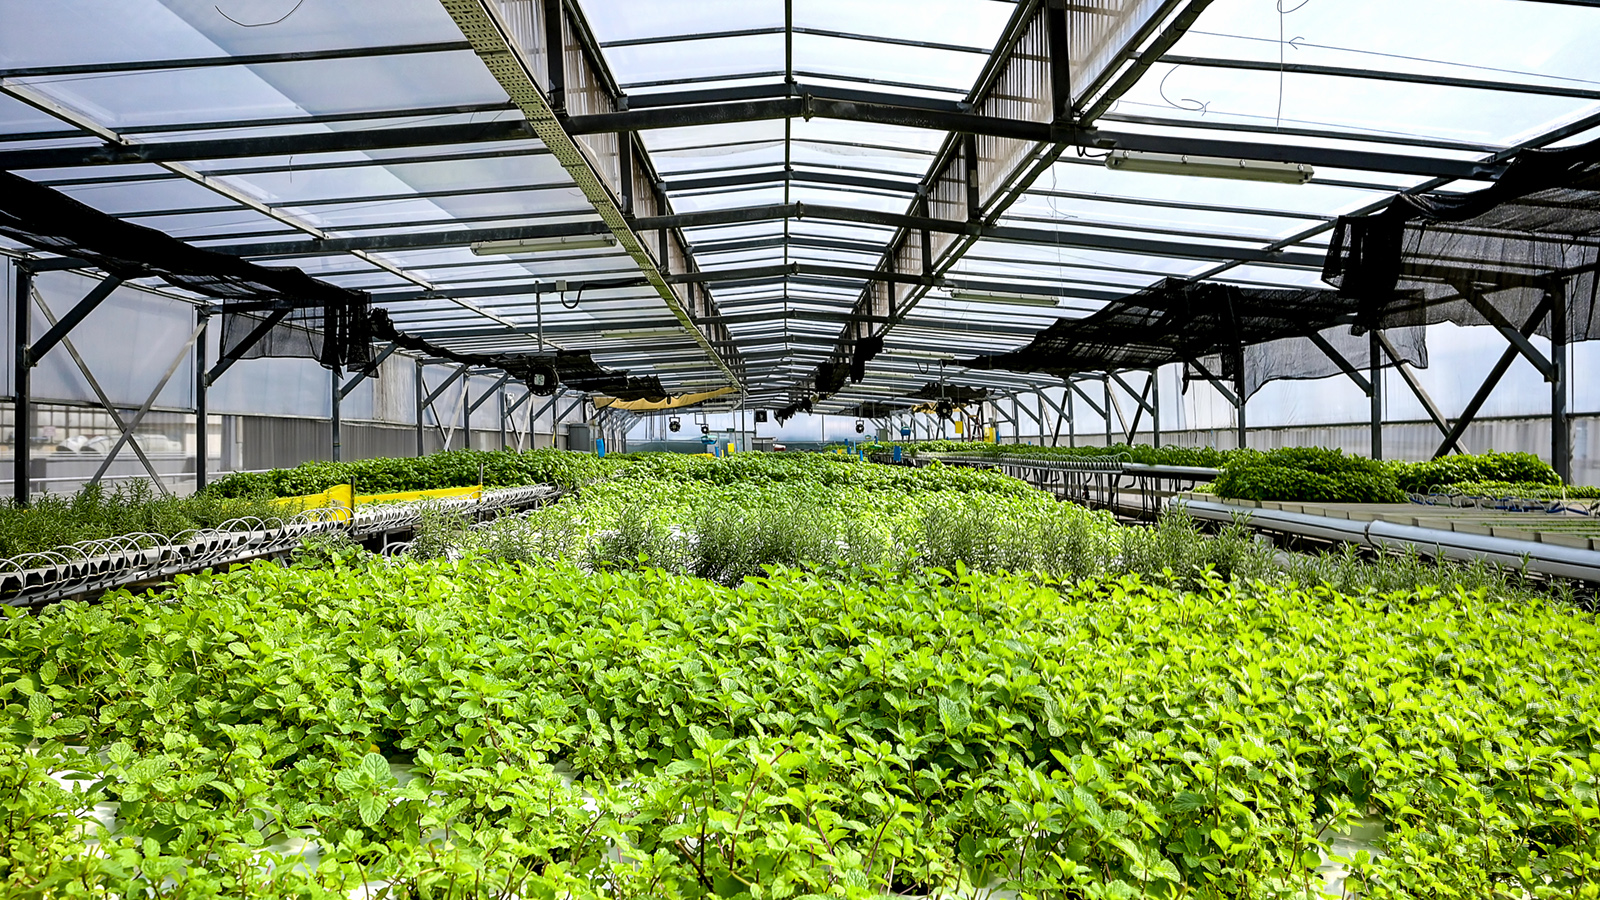 01 WIDE Comcrop_Overall Greenhouse_DSC_3894